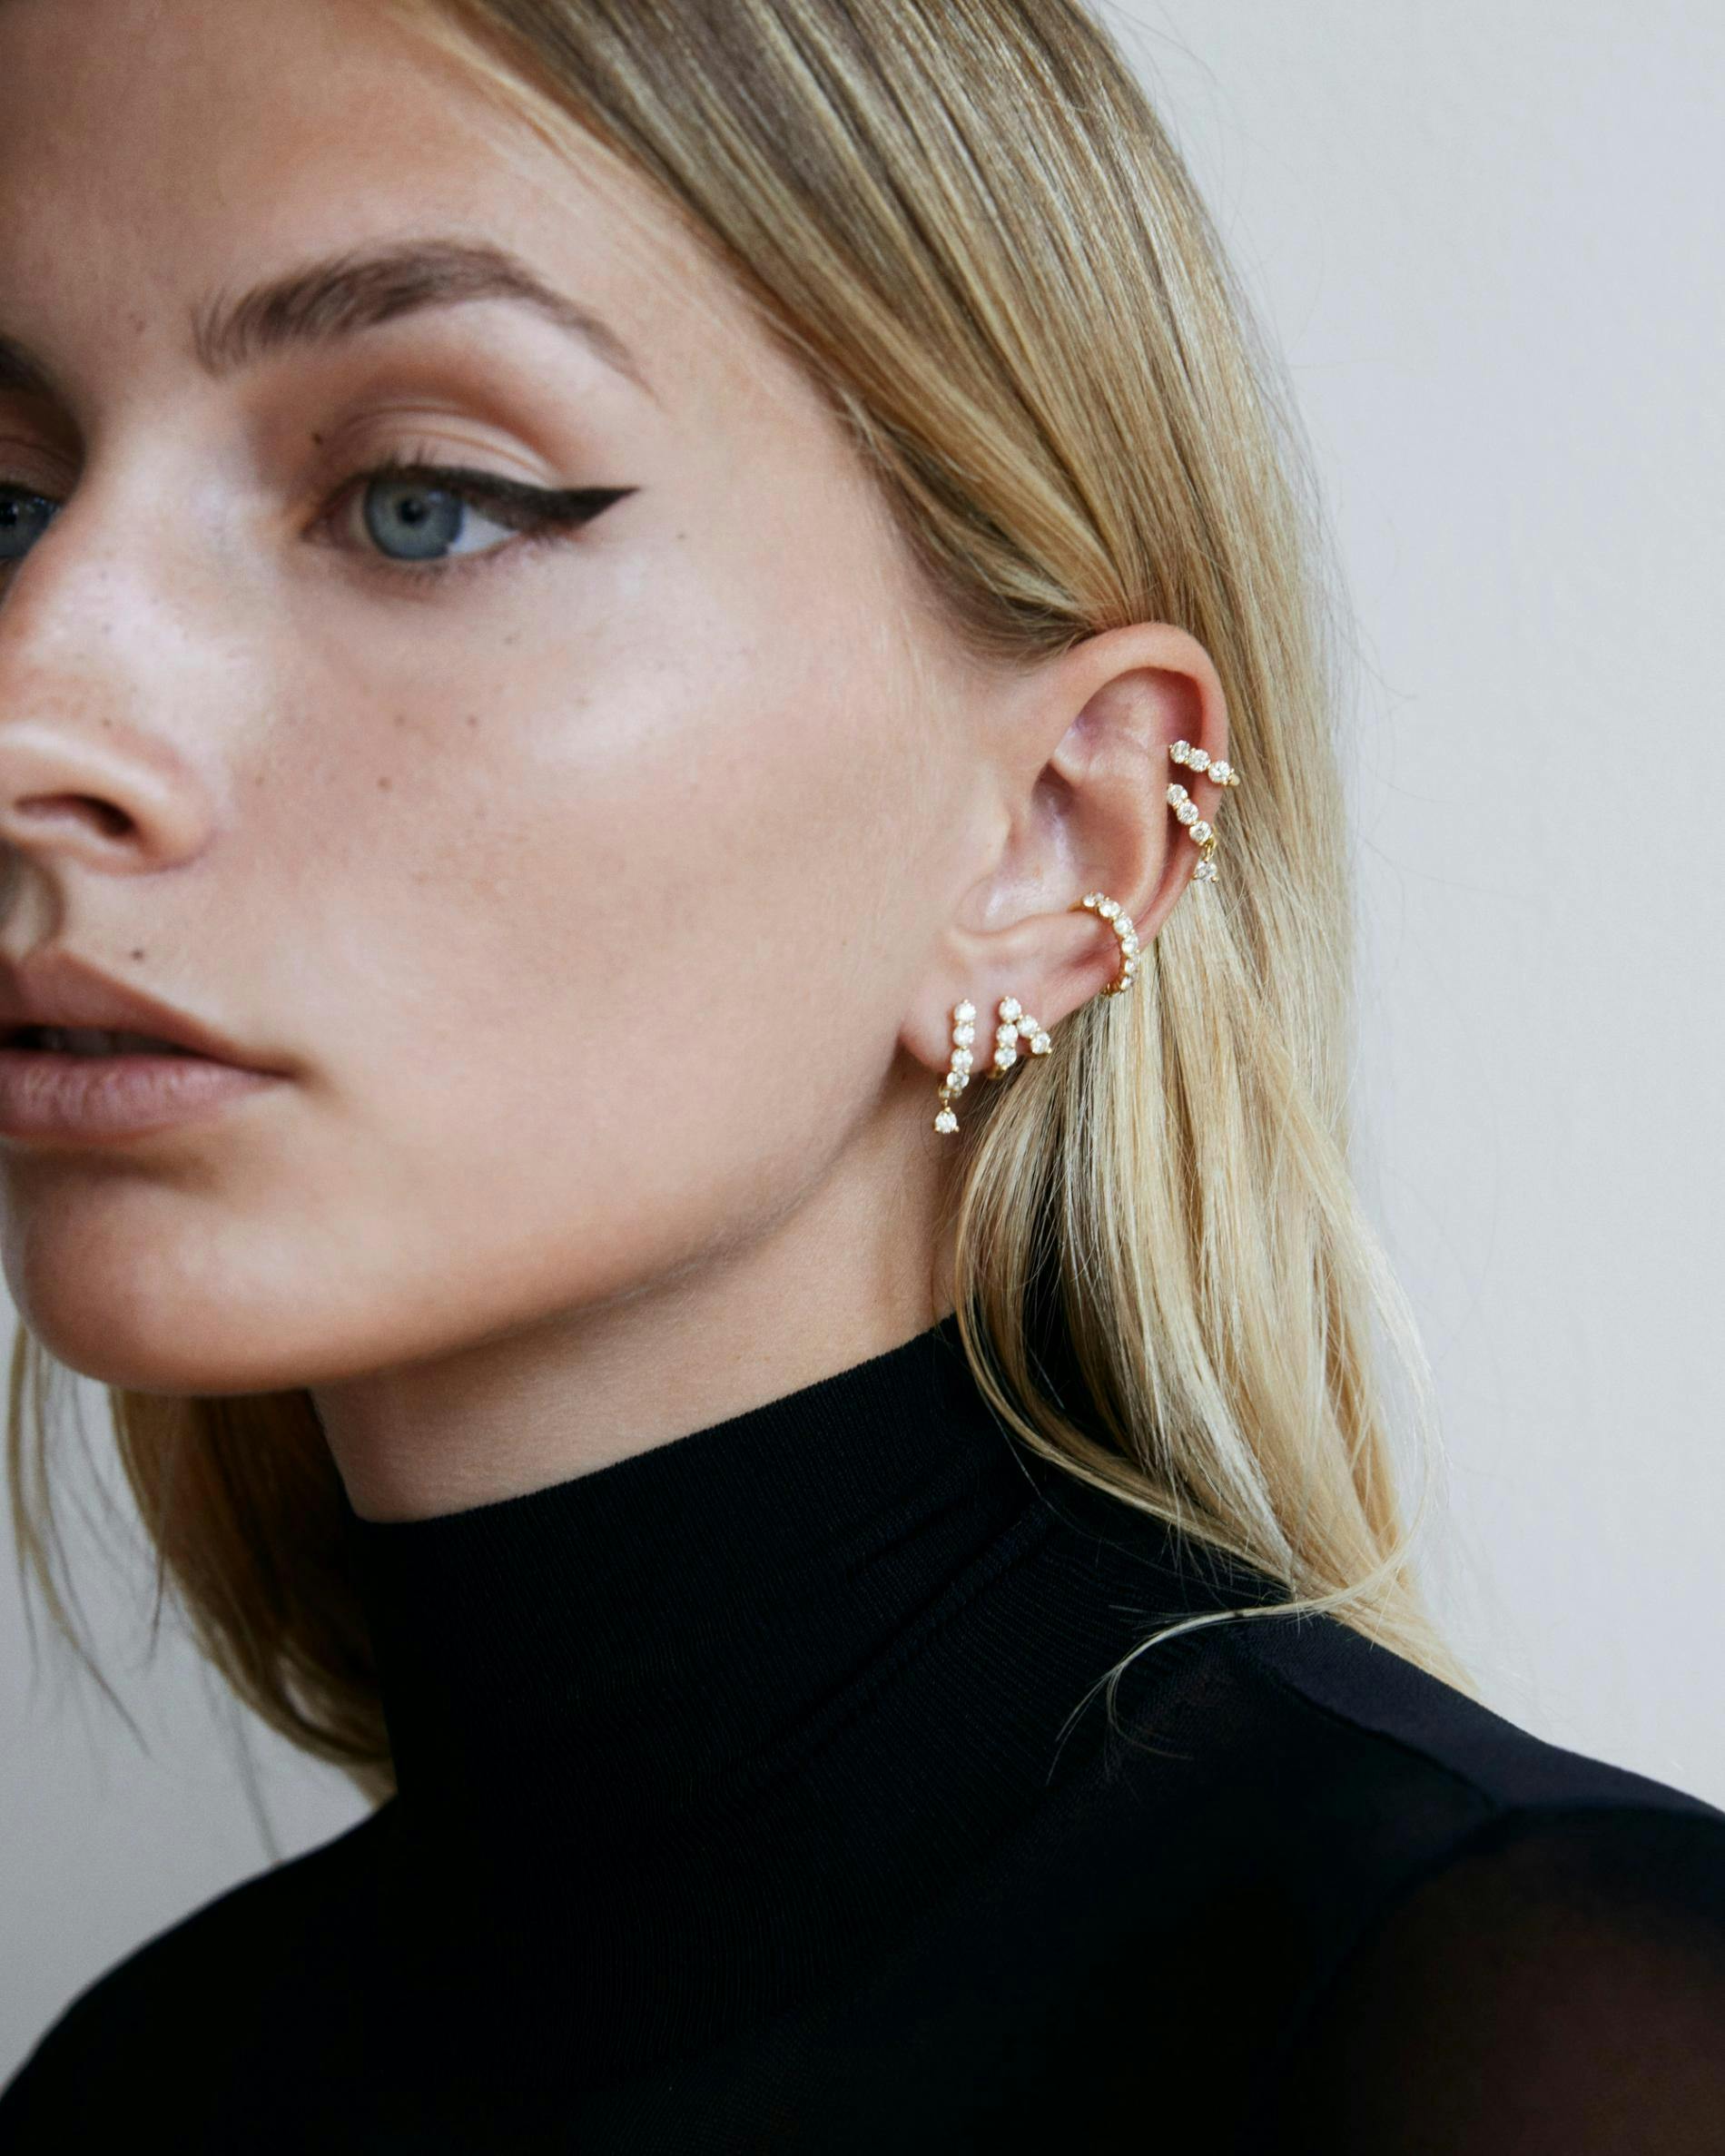 Model wearing multiple diamond ear cuffs and Huggies looking away from camera